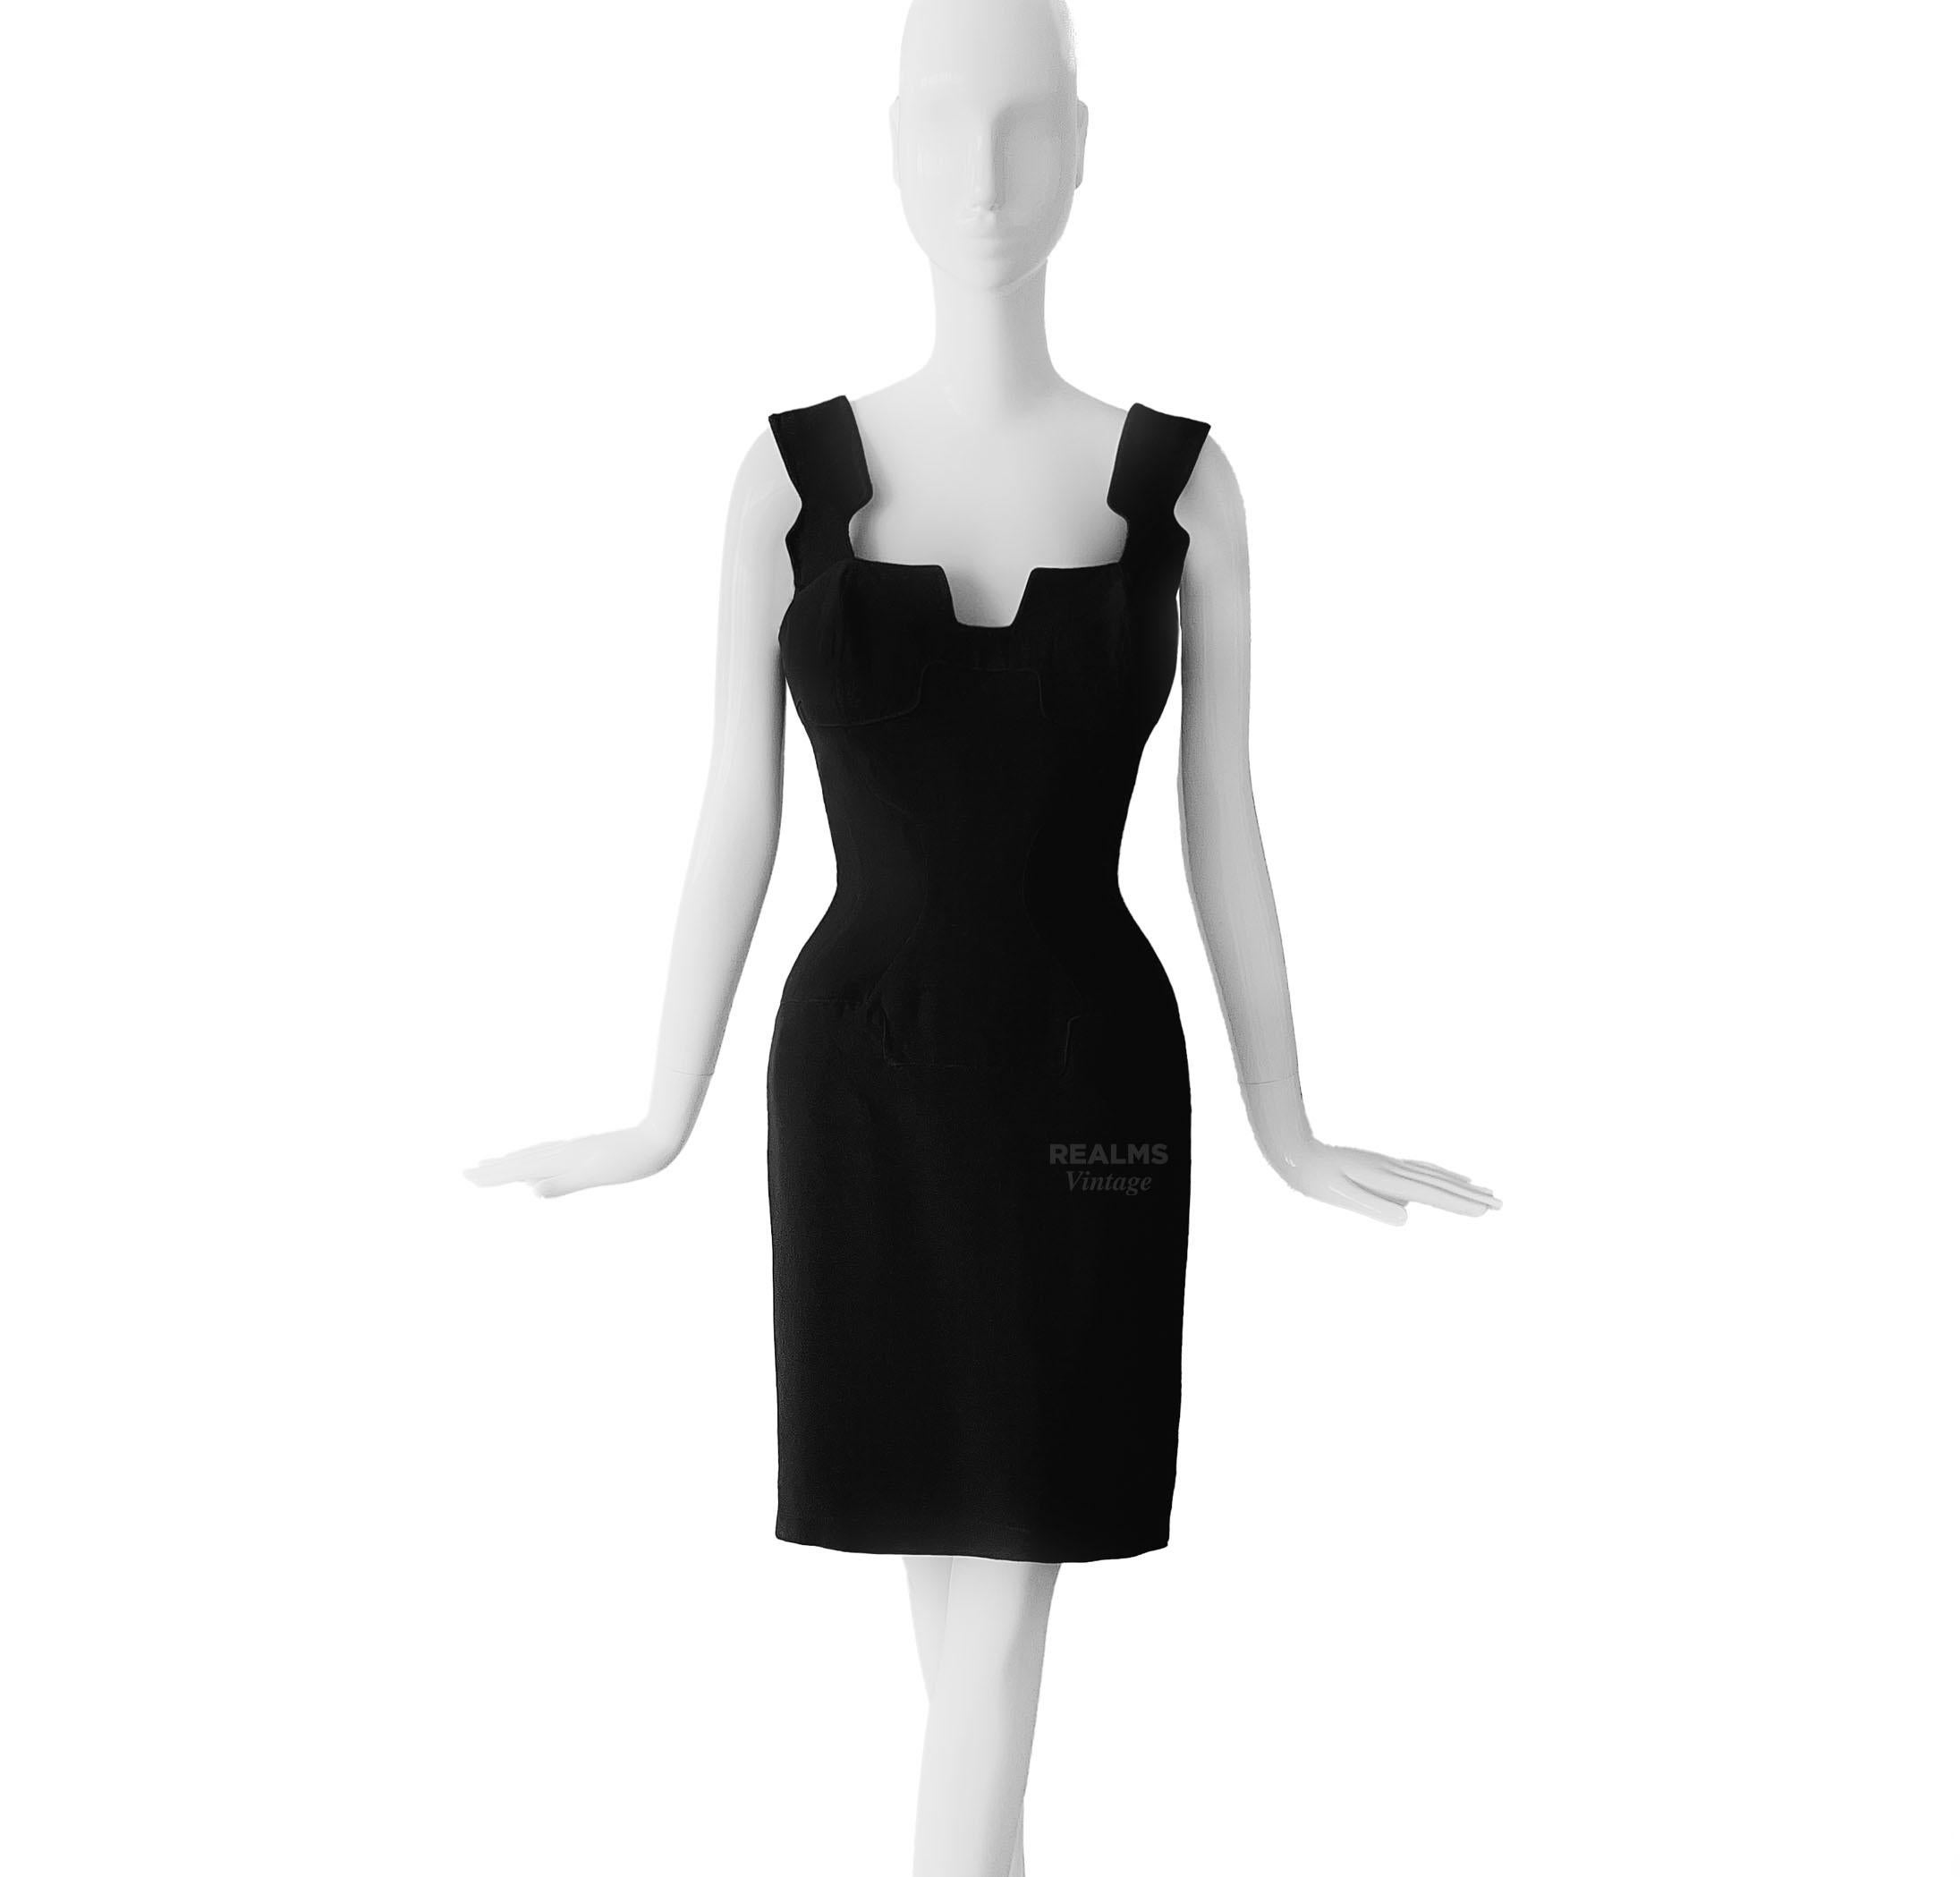 Rare Hot Thierry Mugler Dress SS1994 iconic Black Dress  For Sale 2